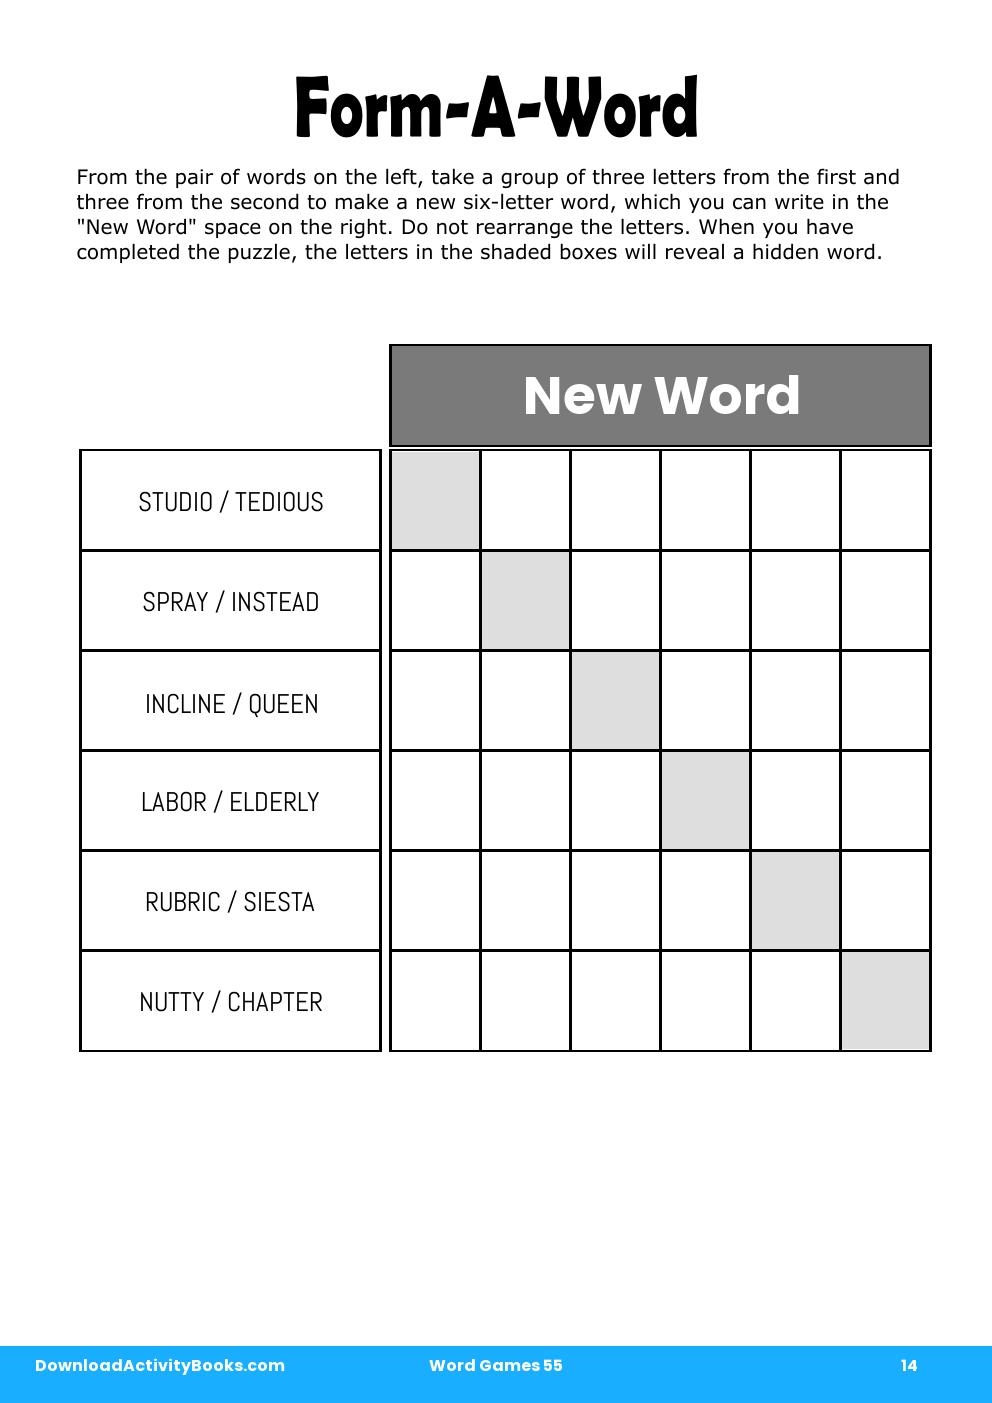 Form-A-Word in Word Games 55